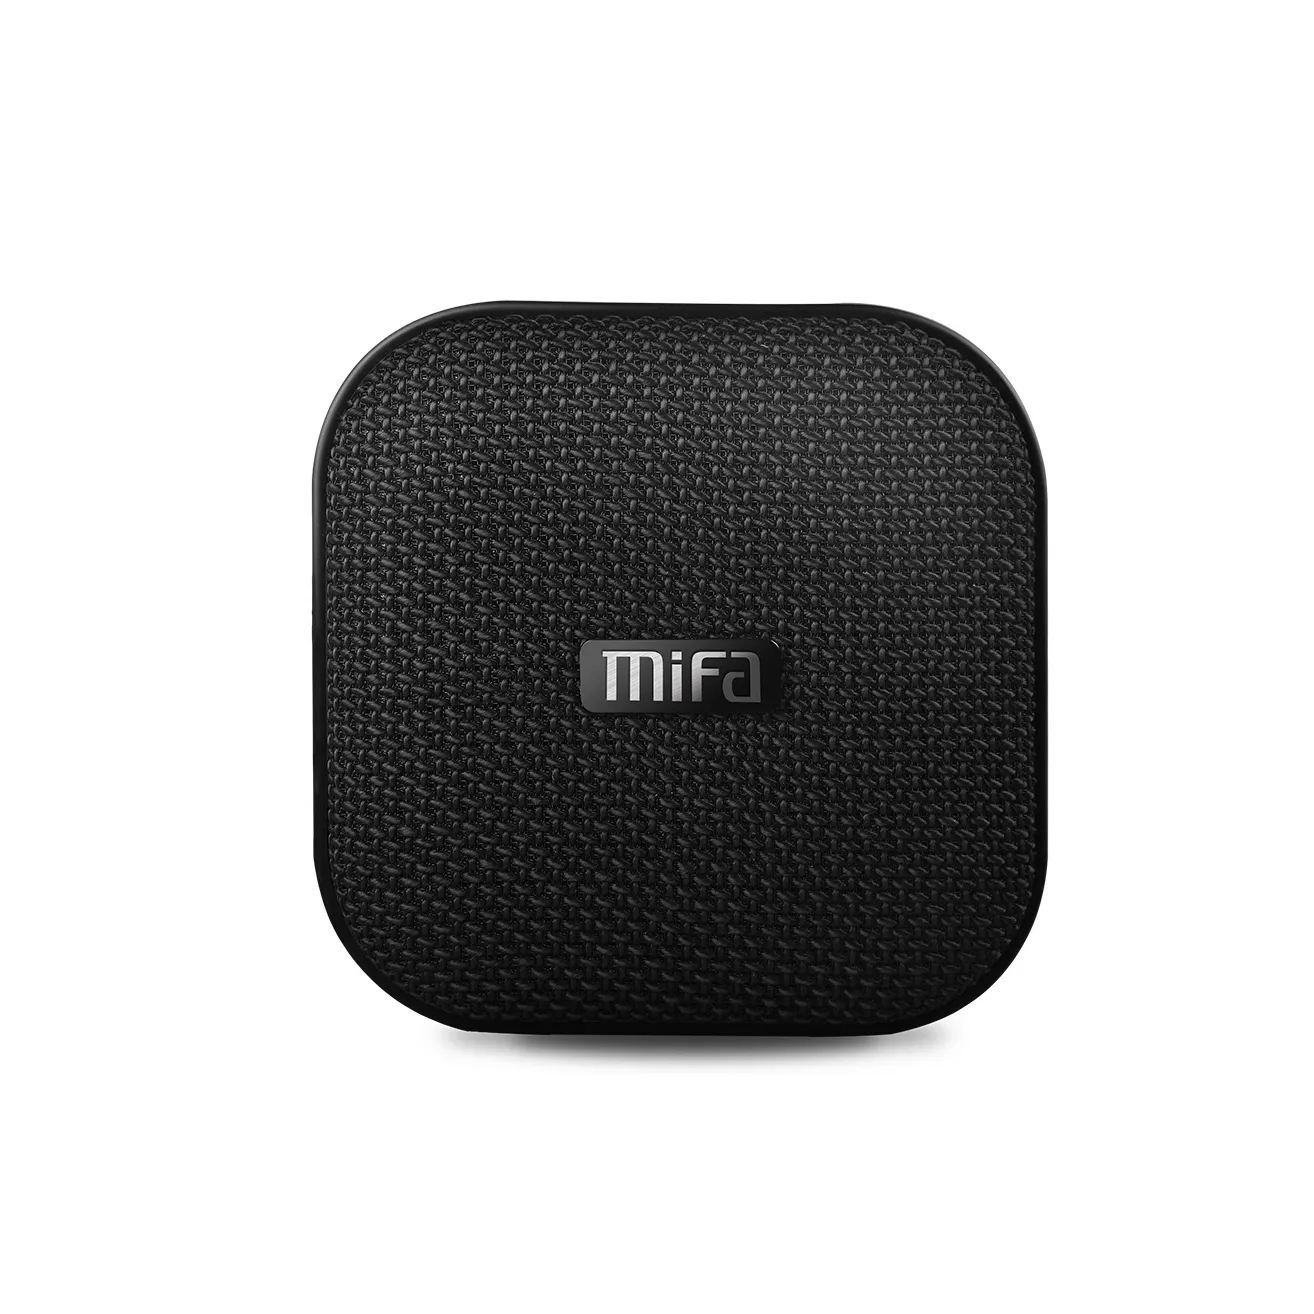 MIFA A1 Portable Wireless Soundbox IP56 Dustproof Waterproof 12-Hour Playtime Built-in Mic TF Card Slot with Fabic cover